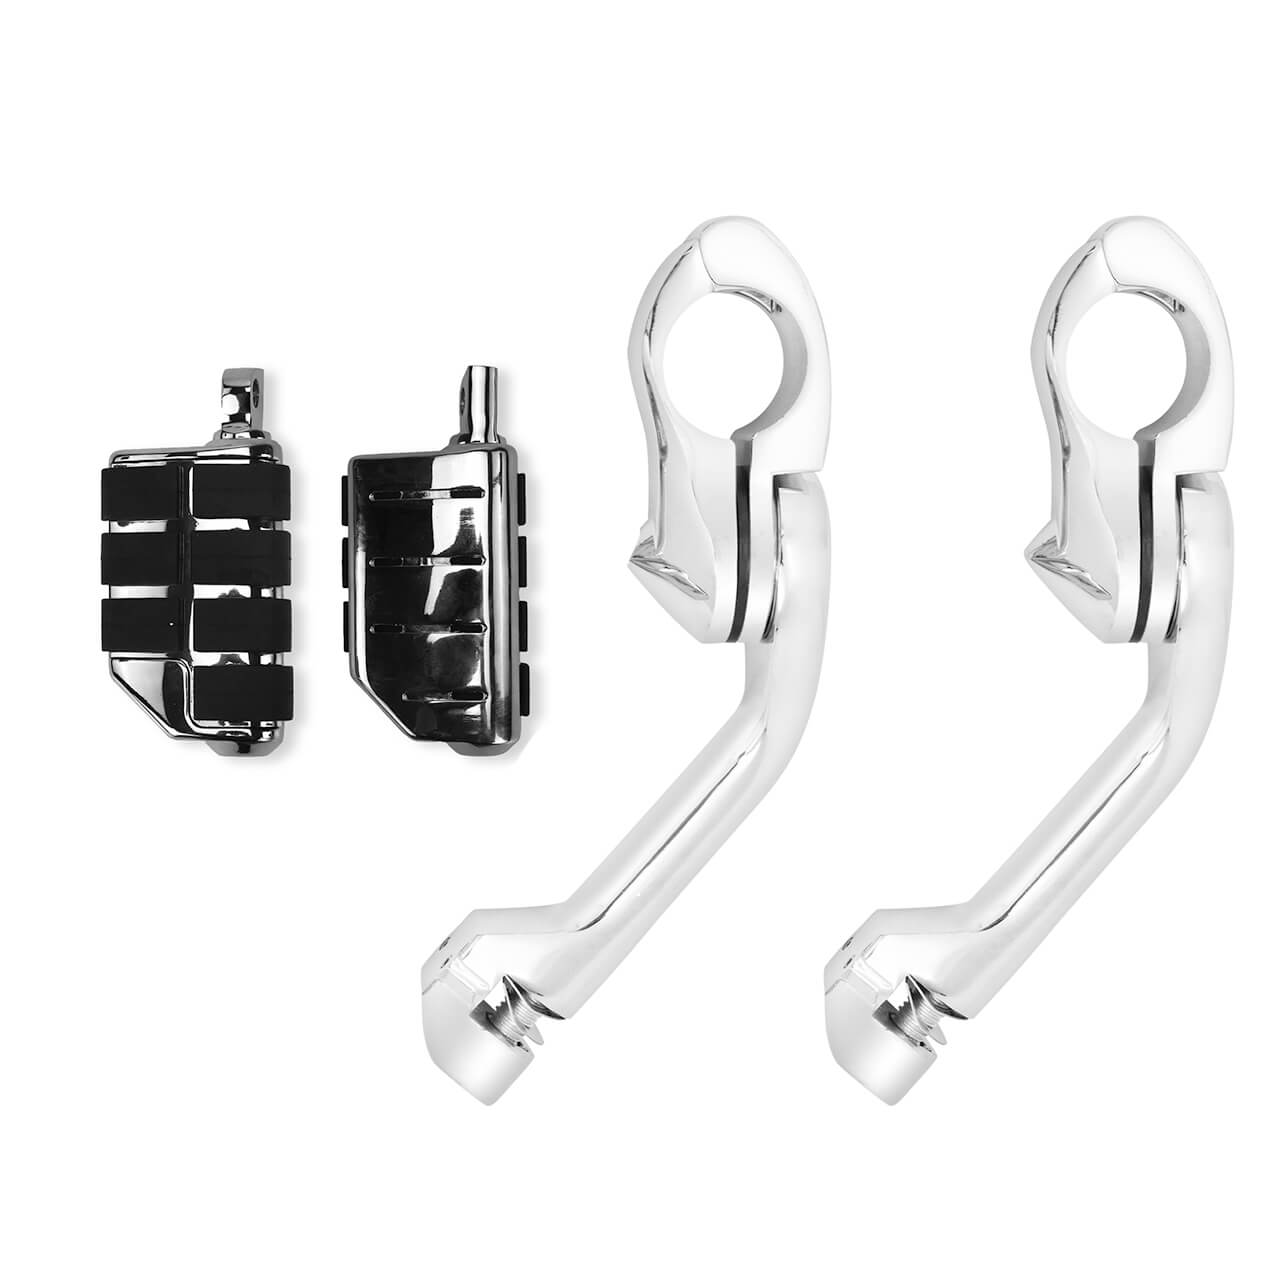 ZH001408-adjustable-highway-foot-pegs-for-harley